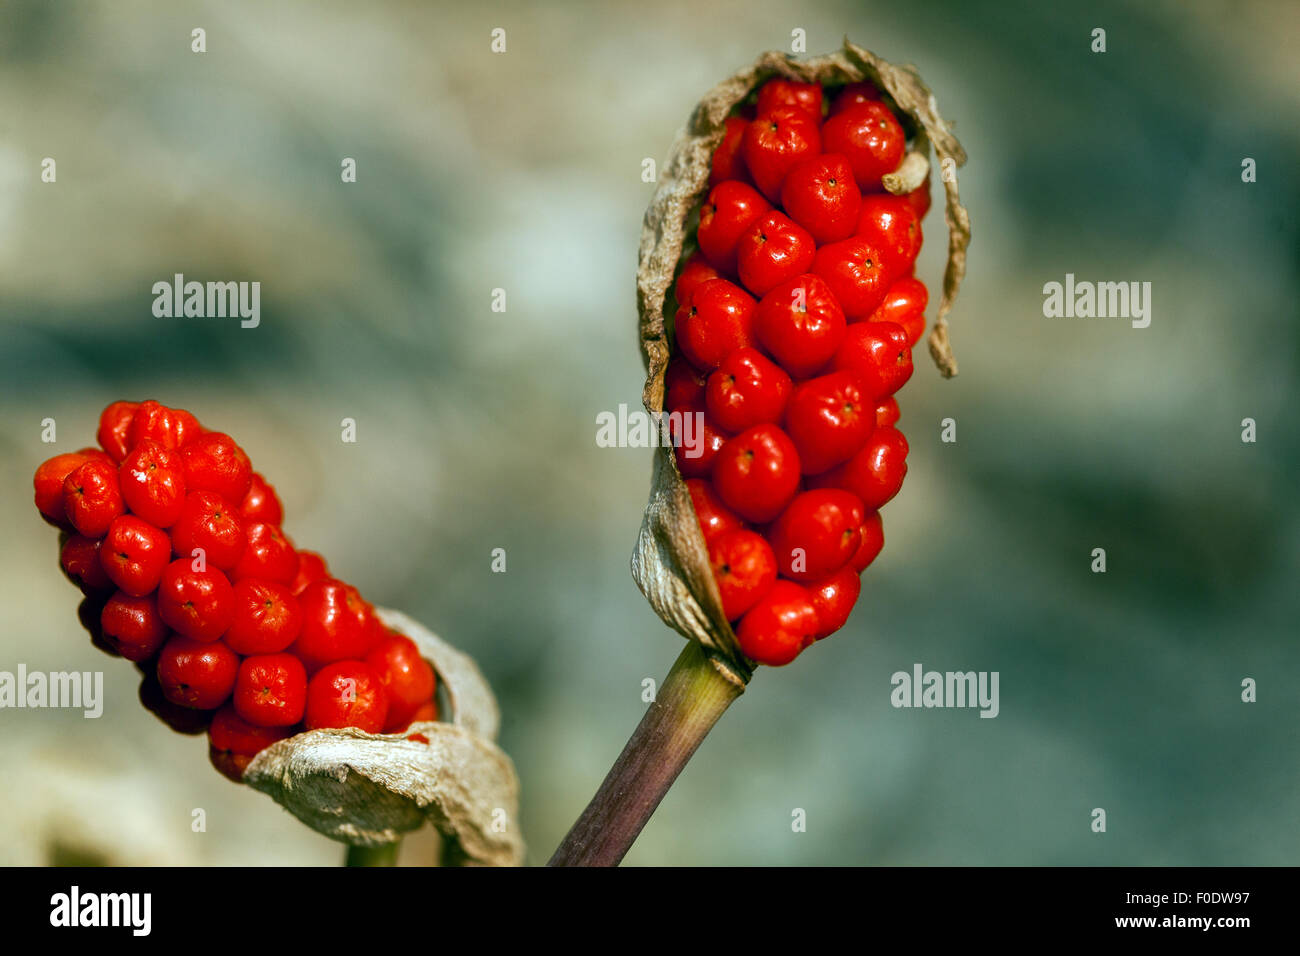 Cuckoo Pint ou Lords and Ladies - Arum maculatum - baies toxiques Banque D'Images